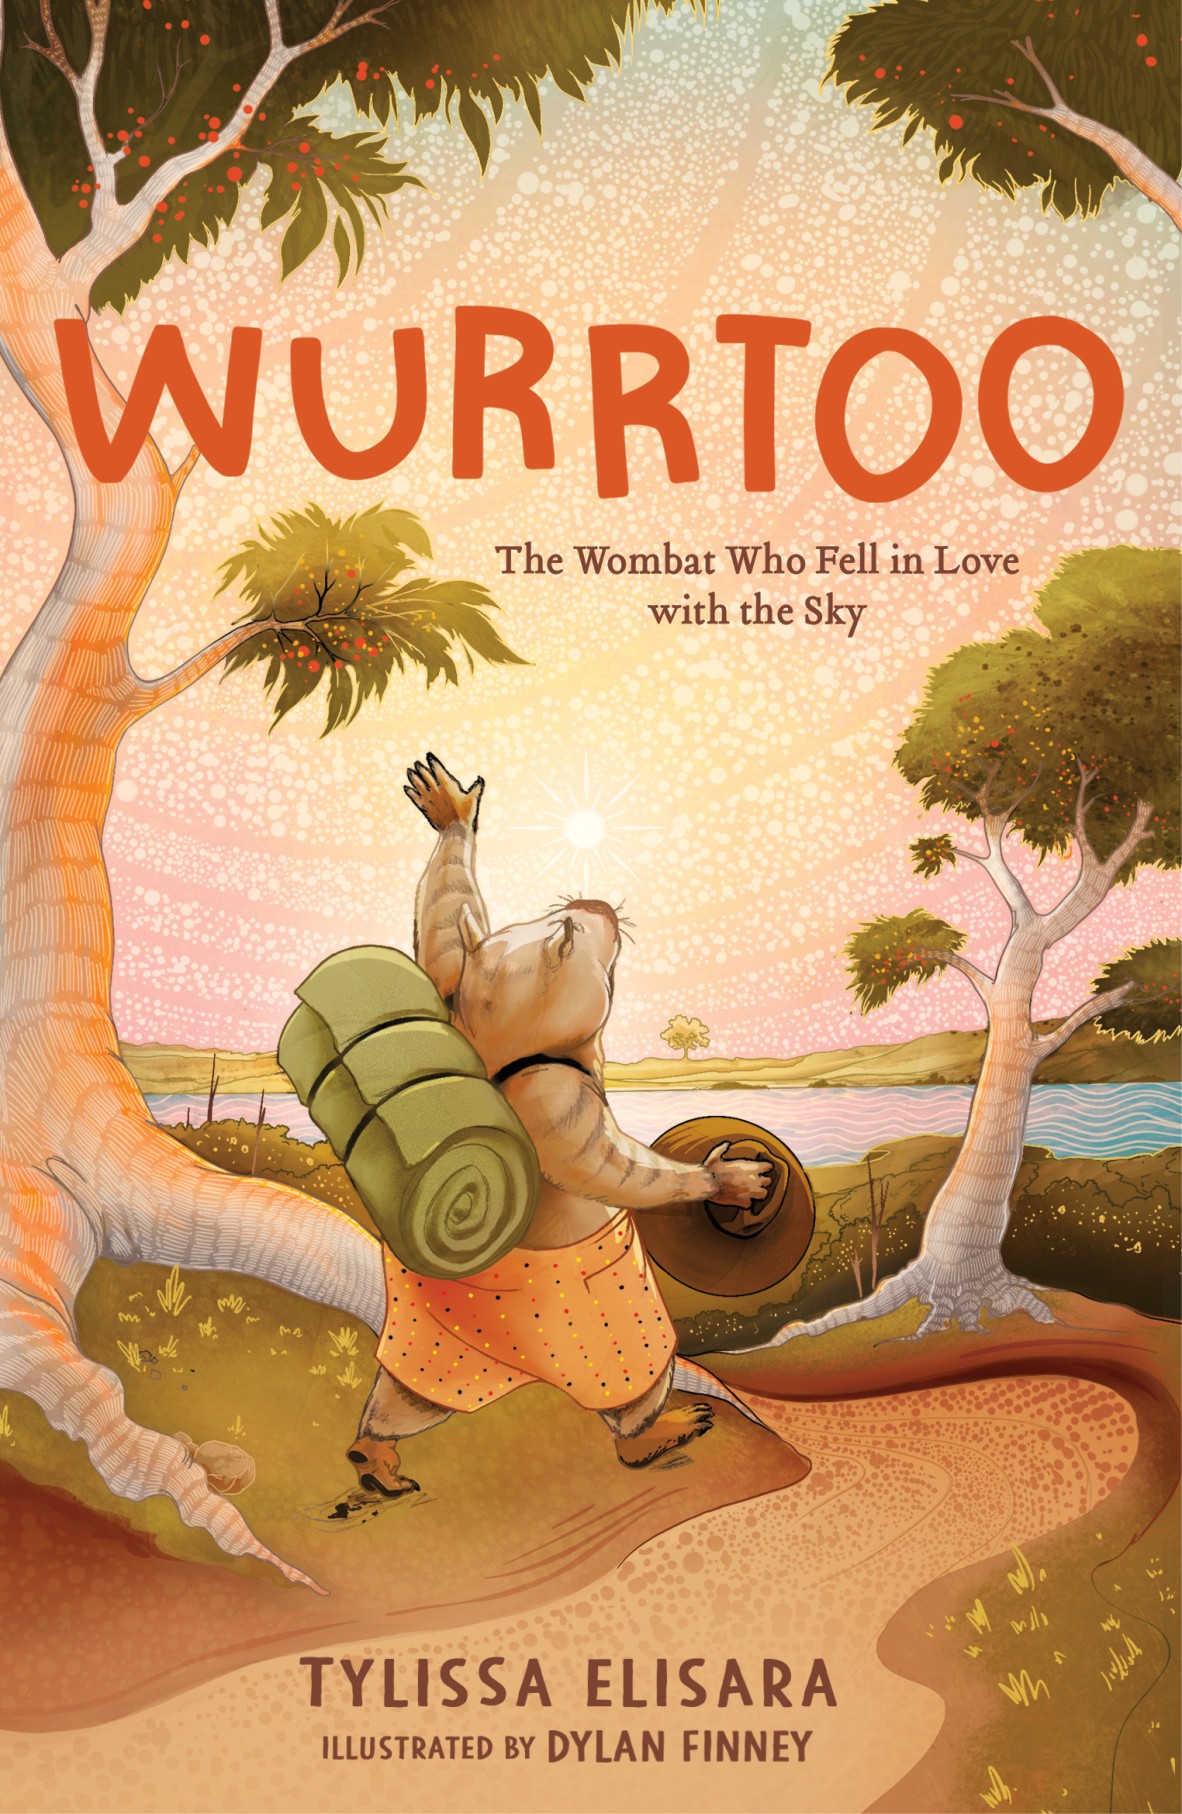 A bright book cover showing a wombat walking on its hind legs along a winding path. The wombat is carrying a swag and a hat. It is waving at the sky with one hand. The text reads Wurrtoo The Wombat Who Fell in Love with the Sky written by Tylissa Elisara and illustrated by Dylan Finney